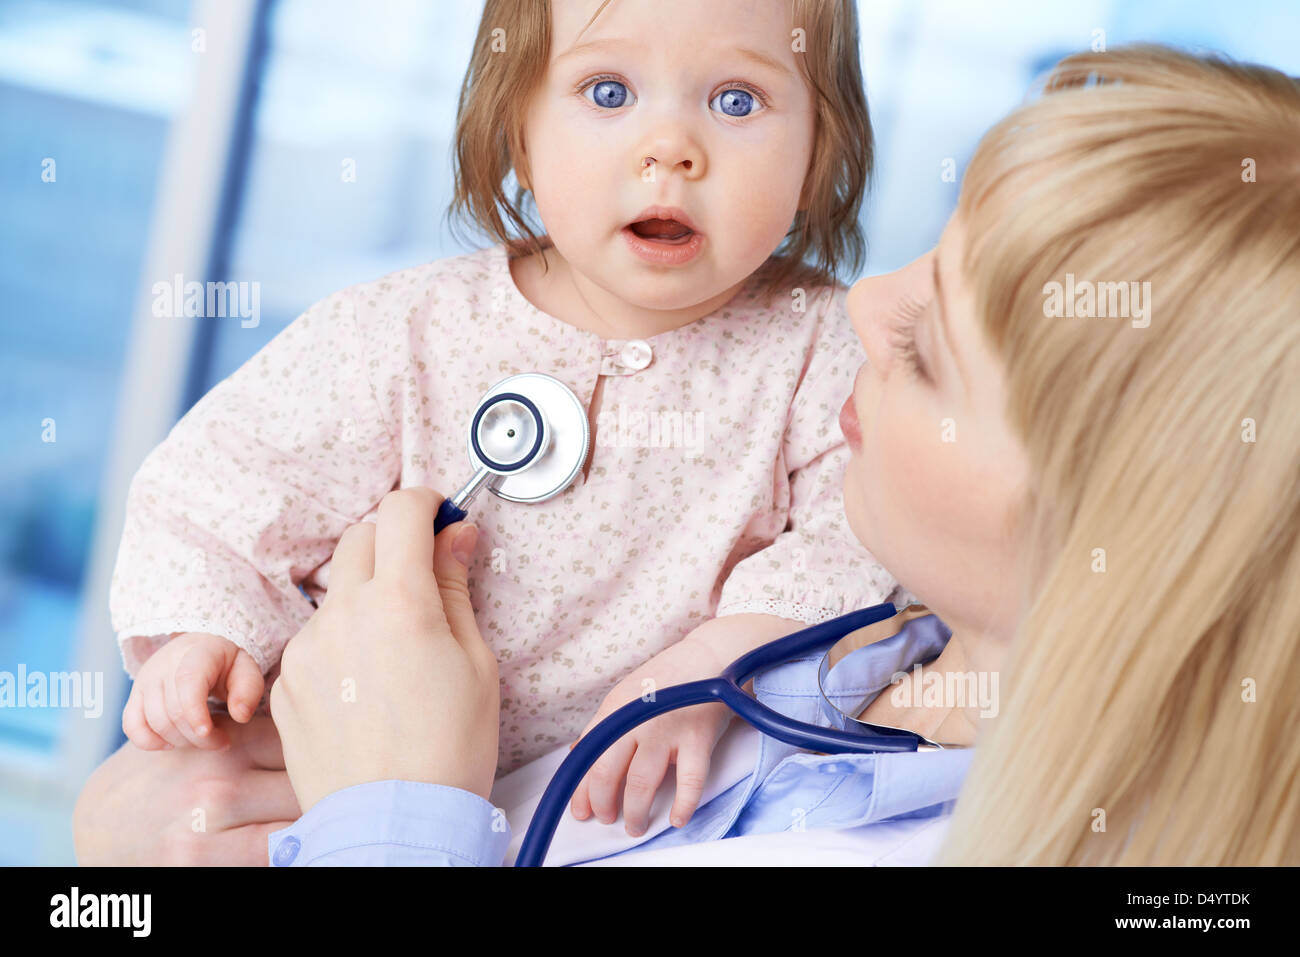 Cute baby being examined by female doctor in hospital Stock Photo